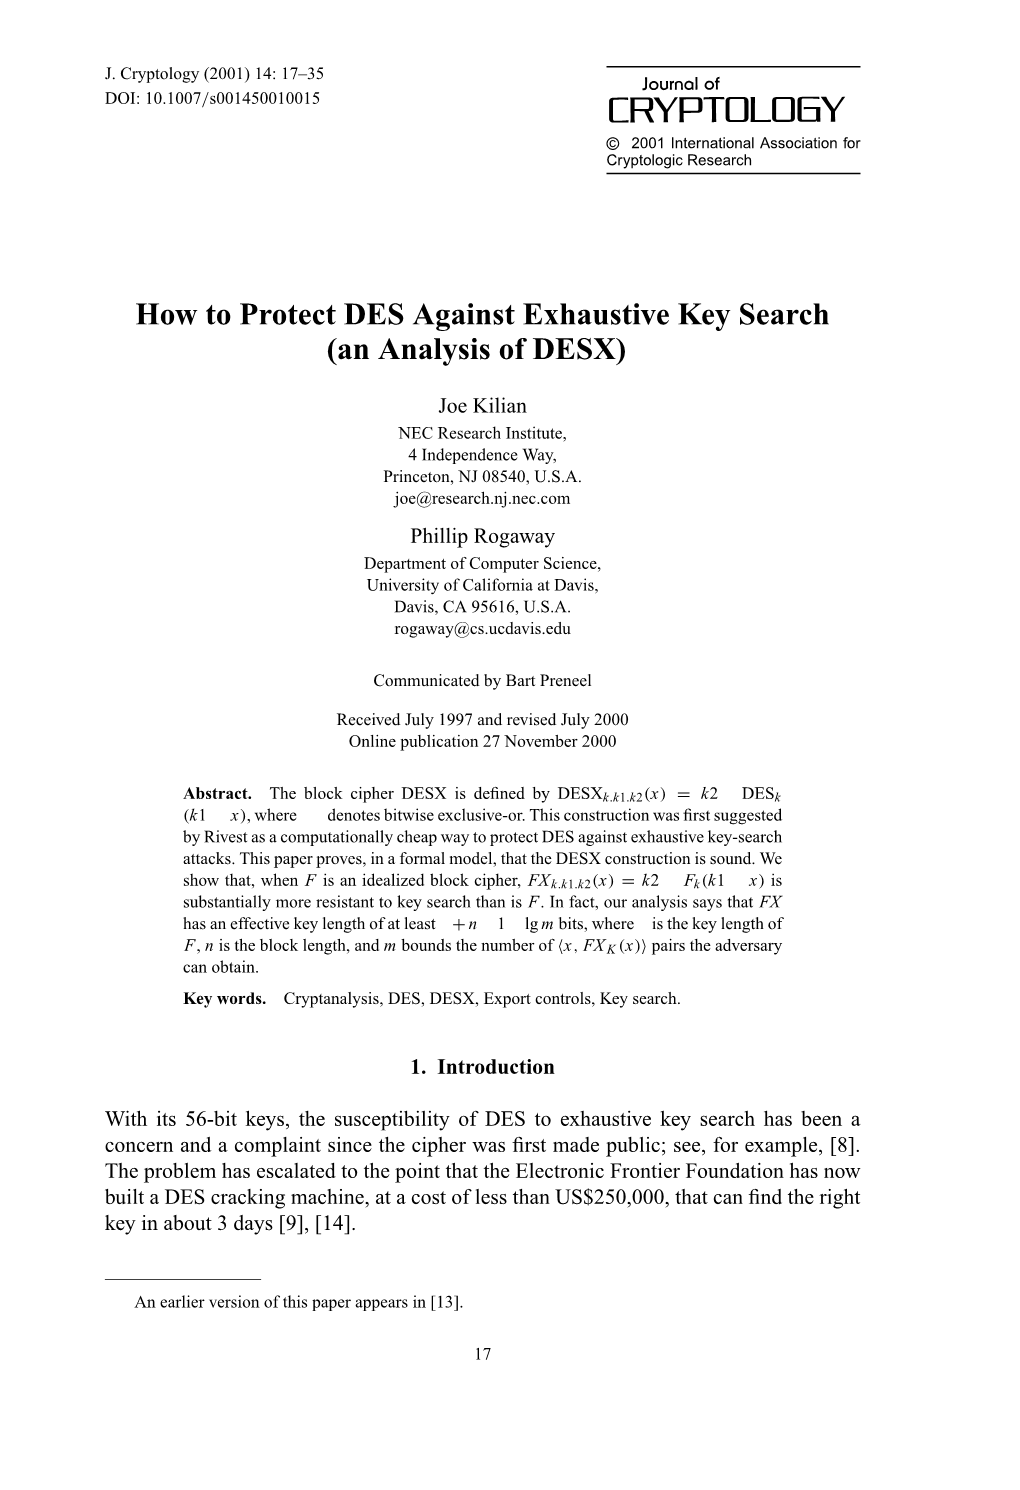 How to Protect DES Against Exhaustive Key Search (An Analysis of DESX)